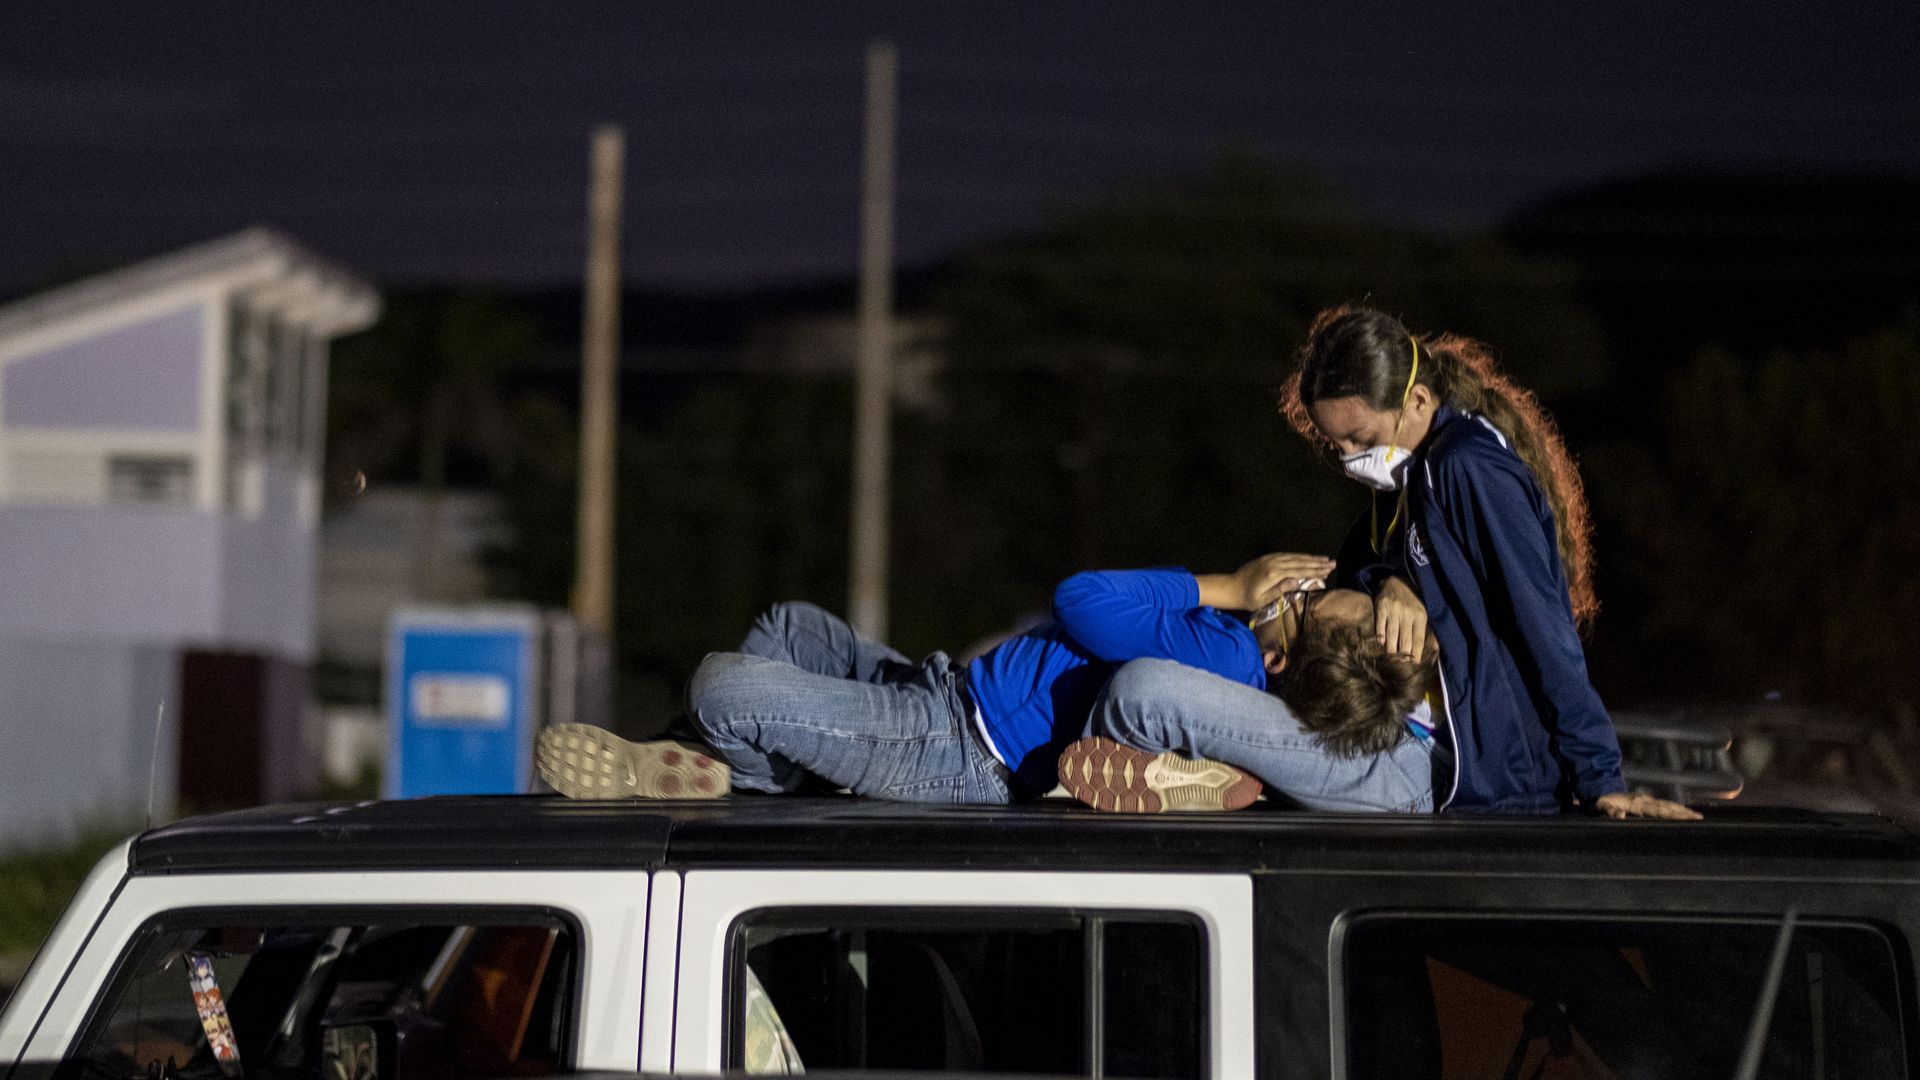 In this image, a child rests their head in a woman's lap on top of a car in Puerto Rico.